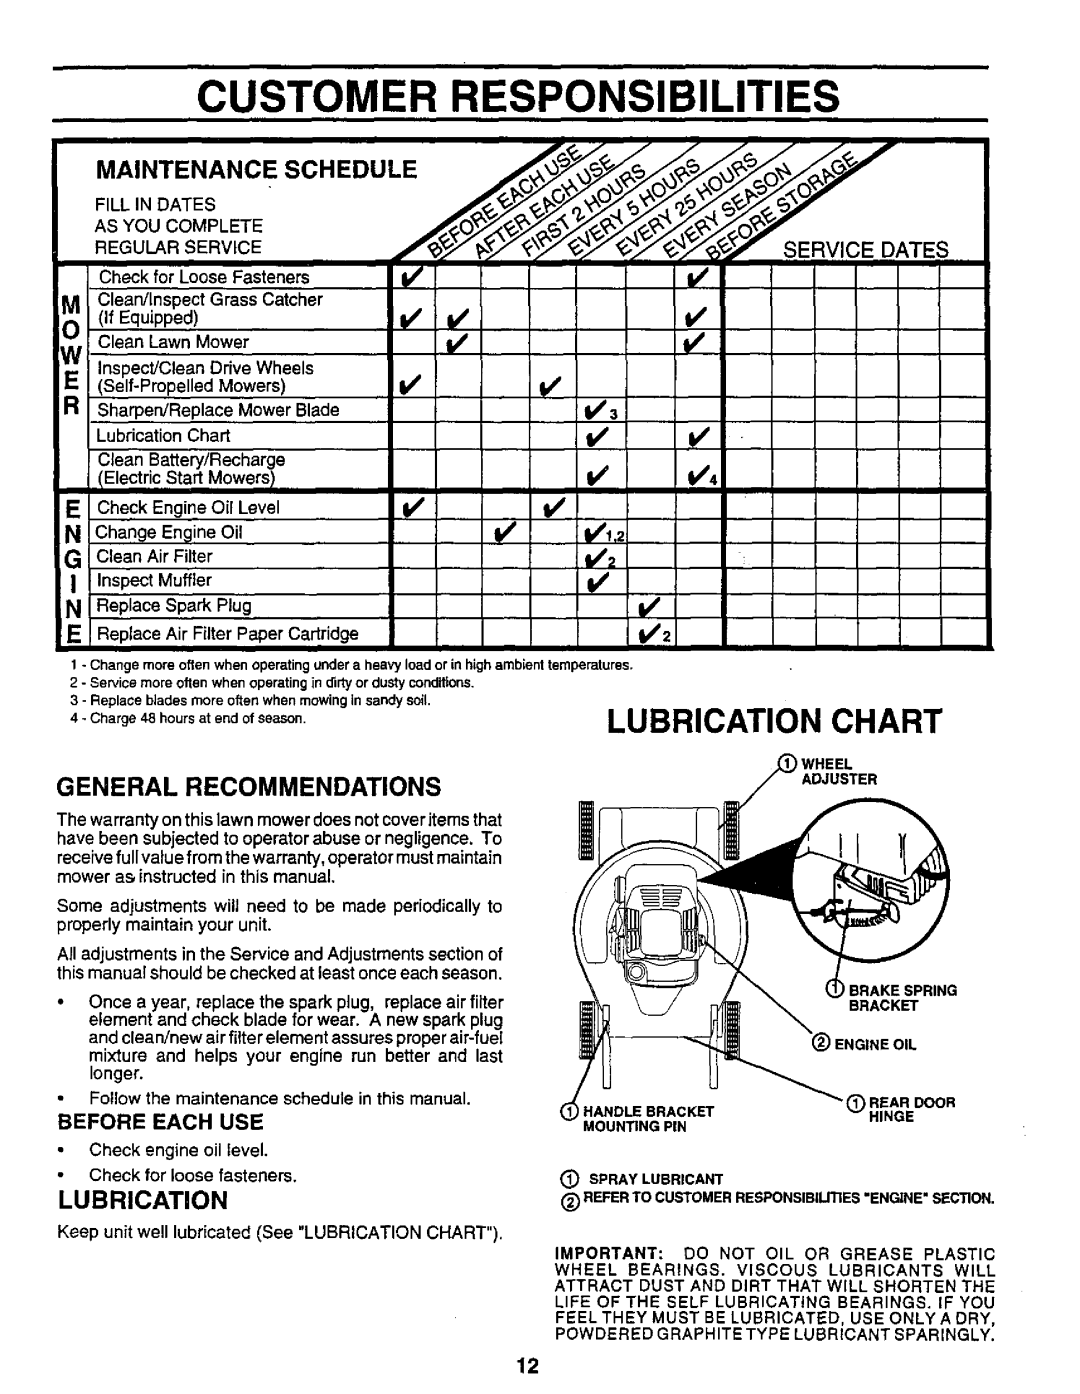 Sears 917.373981 owner manual Customer Responsibilities, ASYouCOMP,ETE, Lubrication Chart, ¢__J_ 